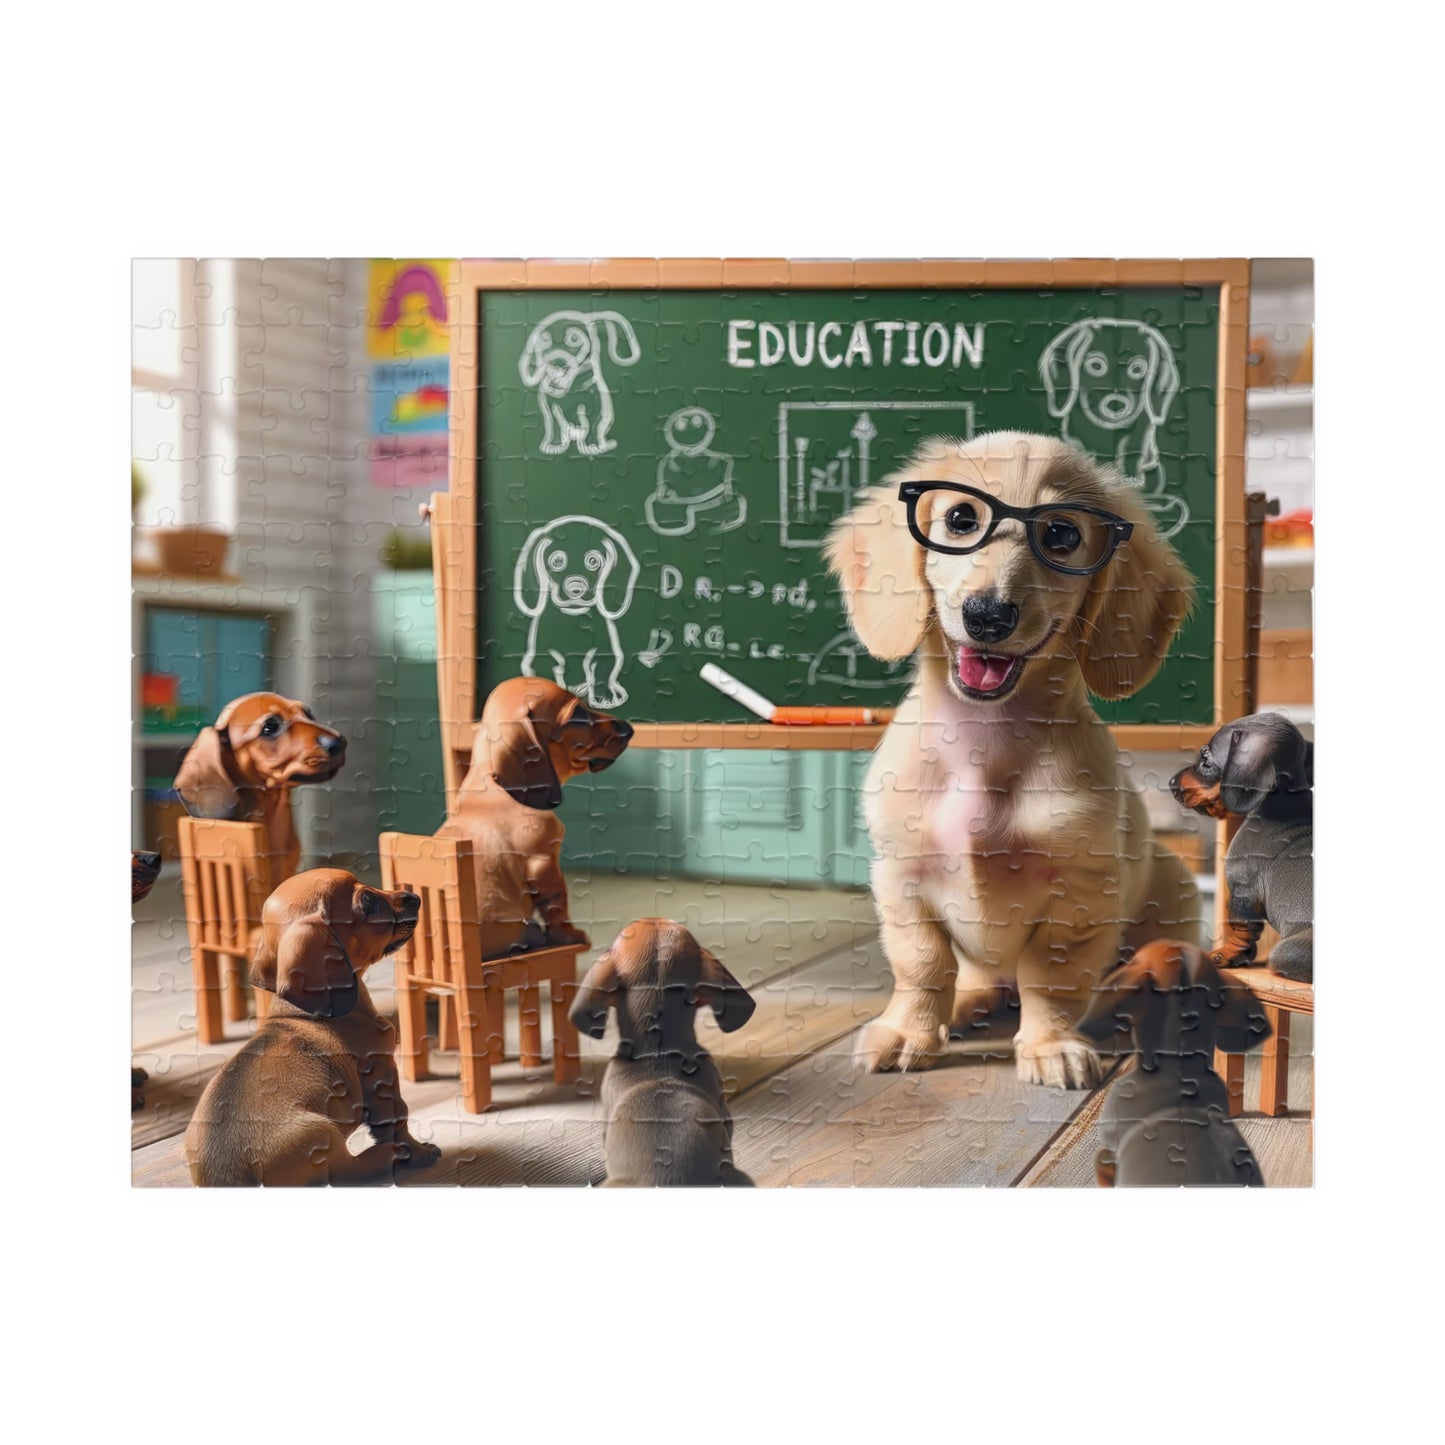 Smarty Paws Classroom Dachshund Puzzle - Fun Dog-Themed Jigsaw, Glasses-Wearing Pup Teacher, 110/252/520 Pieces, Glossy Finish